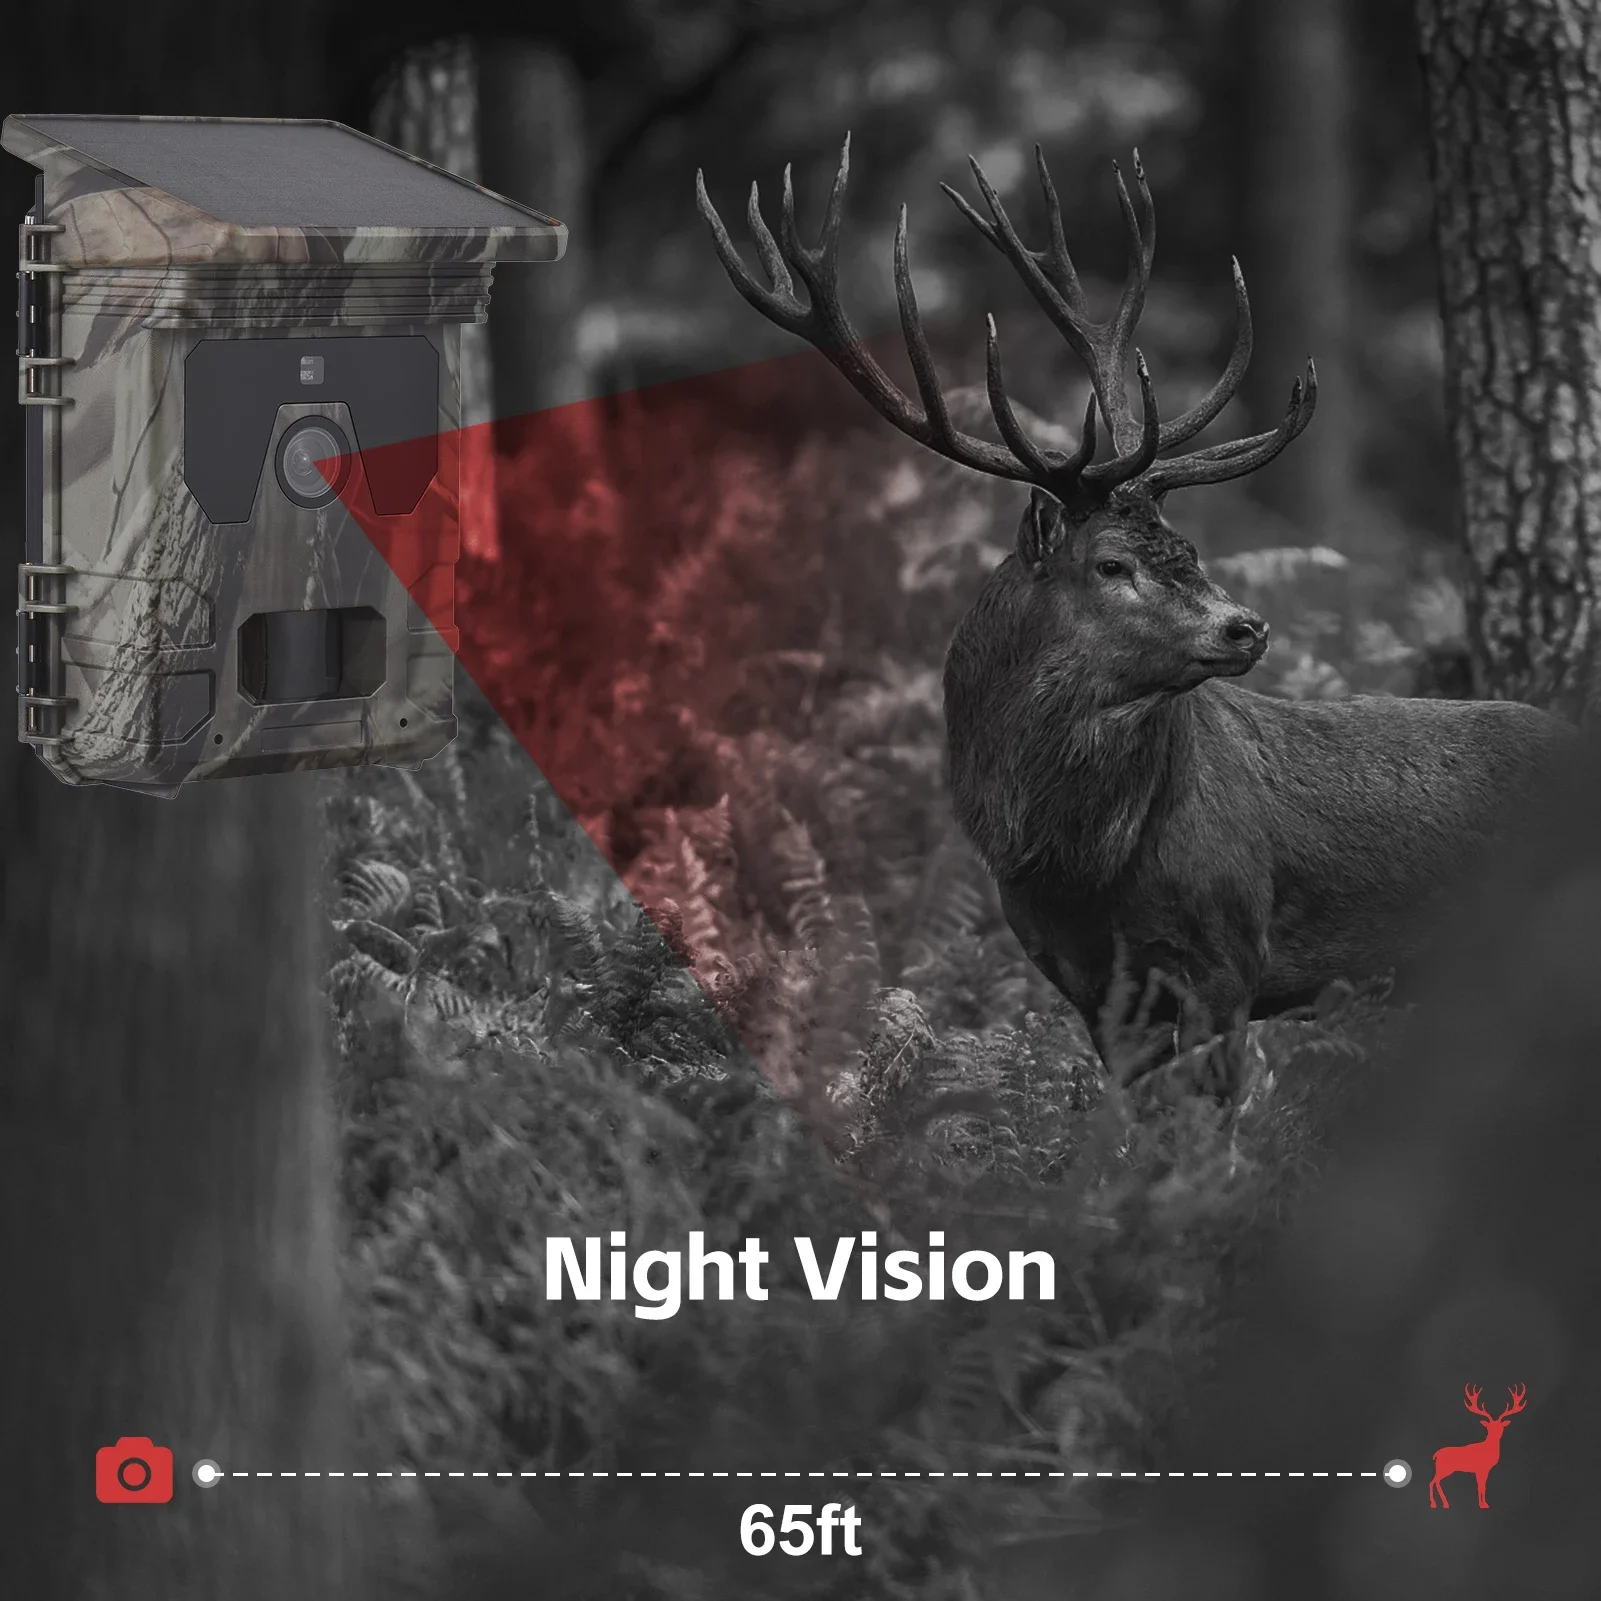 Solar Powered Night Vision Trail Camera 50MP 4K Hunting Cameras 0.3s Trigger Time Trail Camera for Wildlife Monitoring Hunting